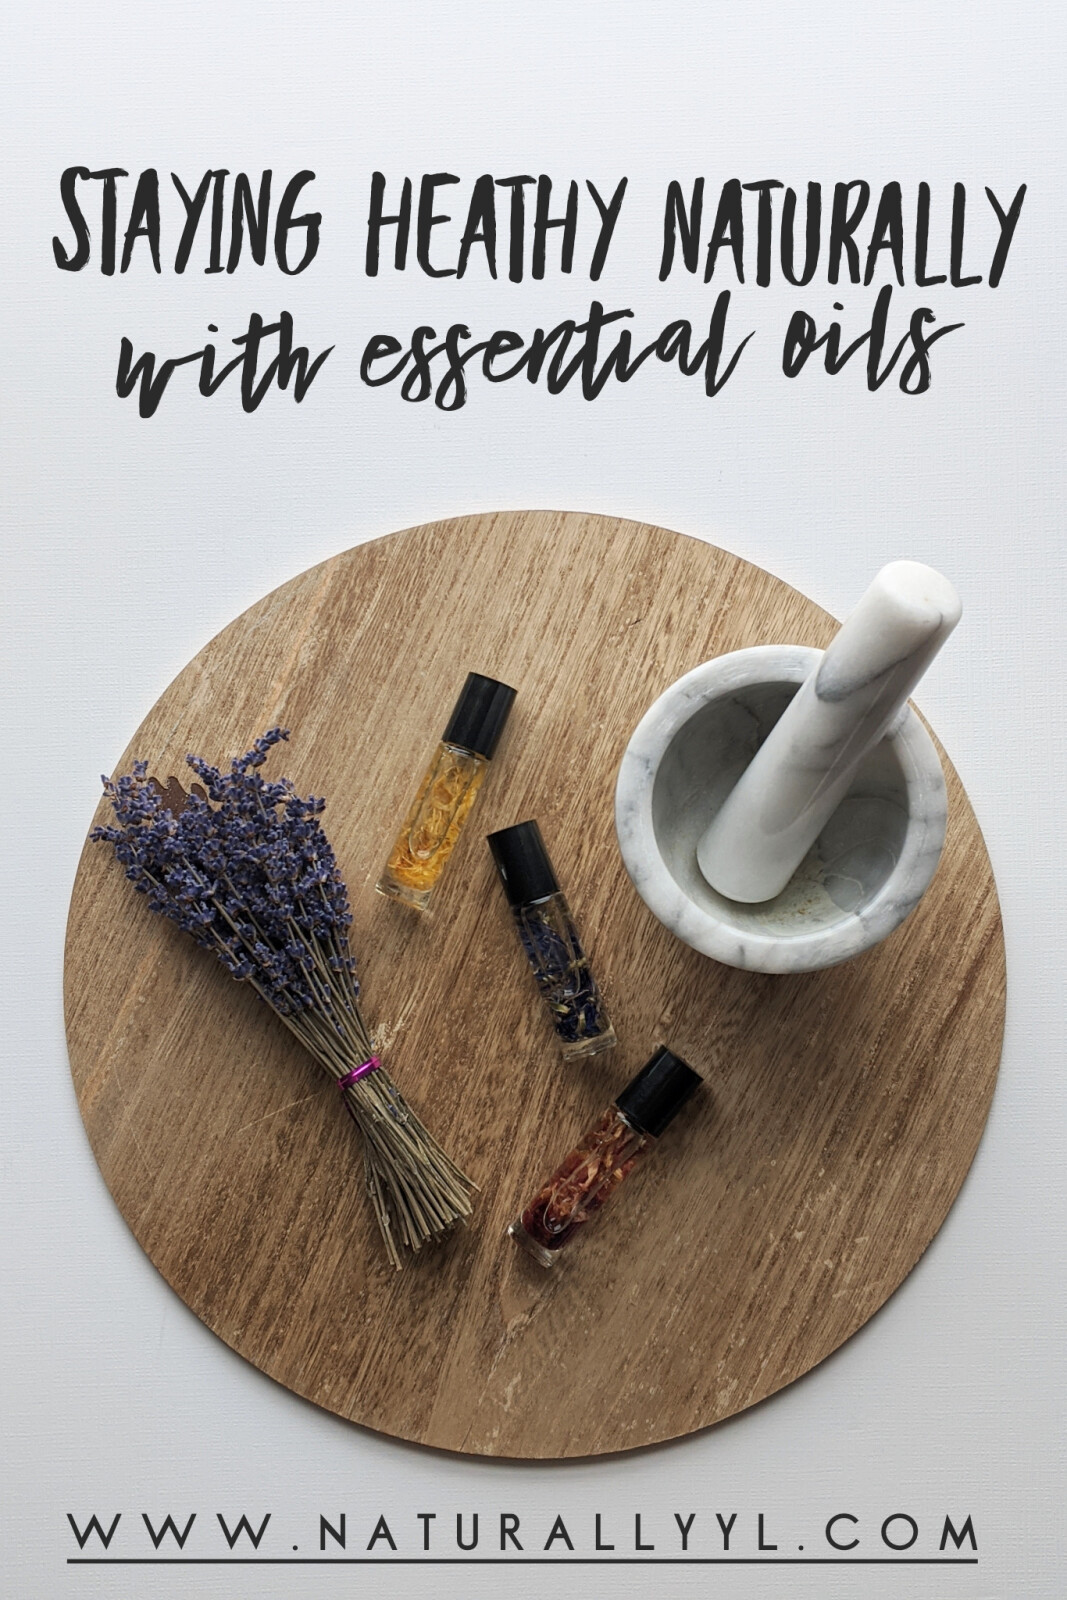 Tips for Staying Healthy Naturally With Essential Oils